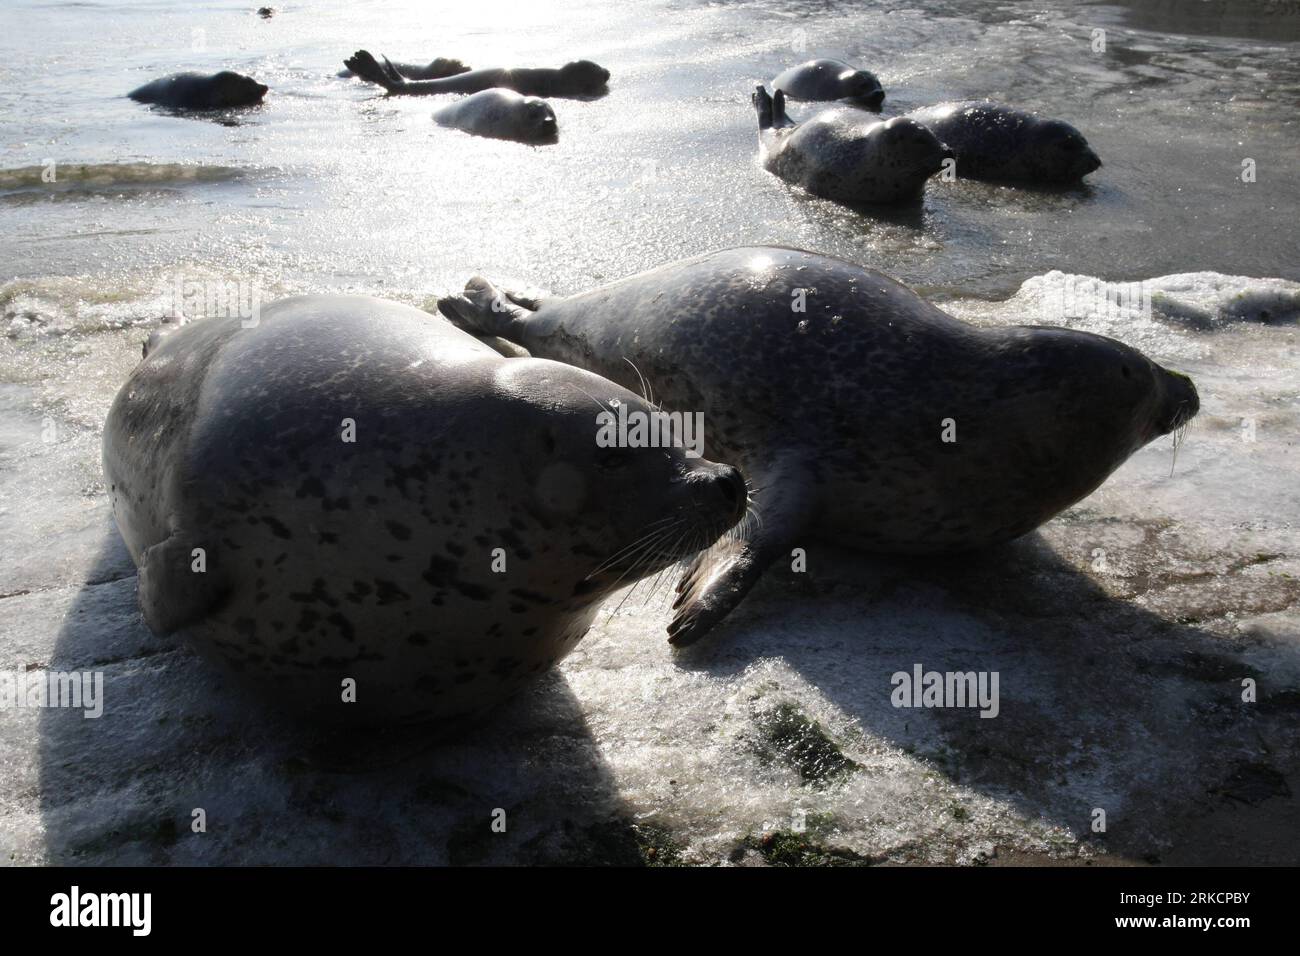 Bildnummer: 54791555  Datum: 07.01.2011  Copyright: imago/Xinhua (110107) -- YANTAI, Jan. 7, 2011 (Xinhua) -- Harbor seals wait for   in ice water at a bay in a scenic area of Yantai, east China s Shandong Province, Jan. 7, 2011. As local temperature falls to minus 7 degrees centigrade, harbor seals at the scenic area were trapped by the ice on the surface of the sea water. Staff members have taken efforts in order to help the harbor seals get through the cold winter. The harbor seal is one of Chinese highly protected species. (Xinhua) (zhs)  CHINA-SHANDONG-SEALS-TRAPPED (CN) PUBLICATIONxNOTxI Stock Photo